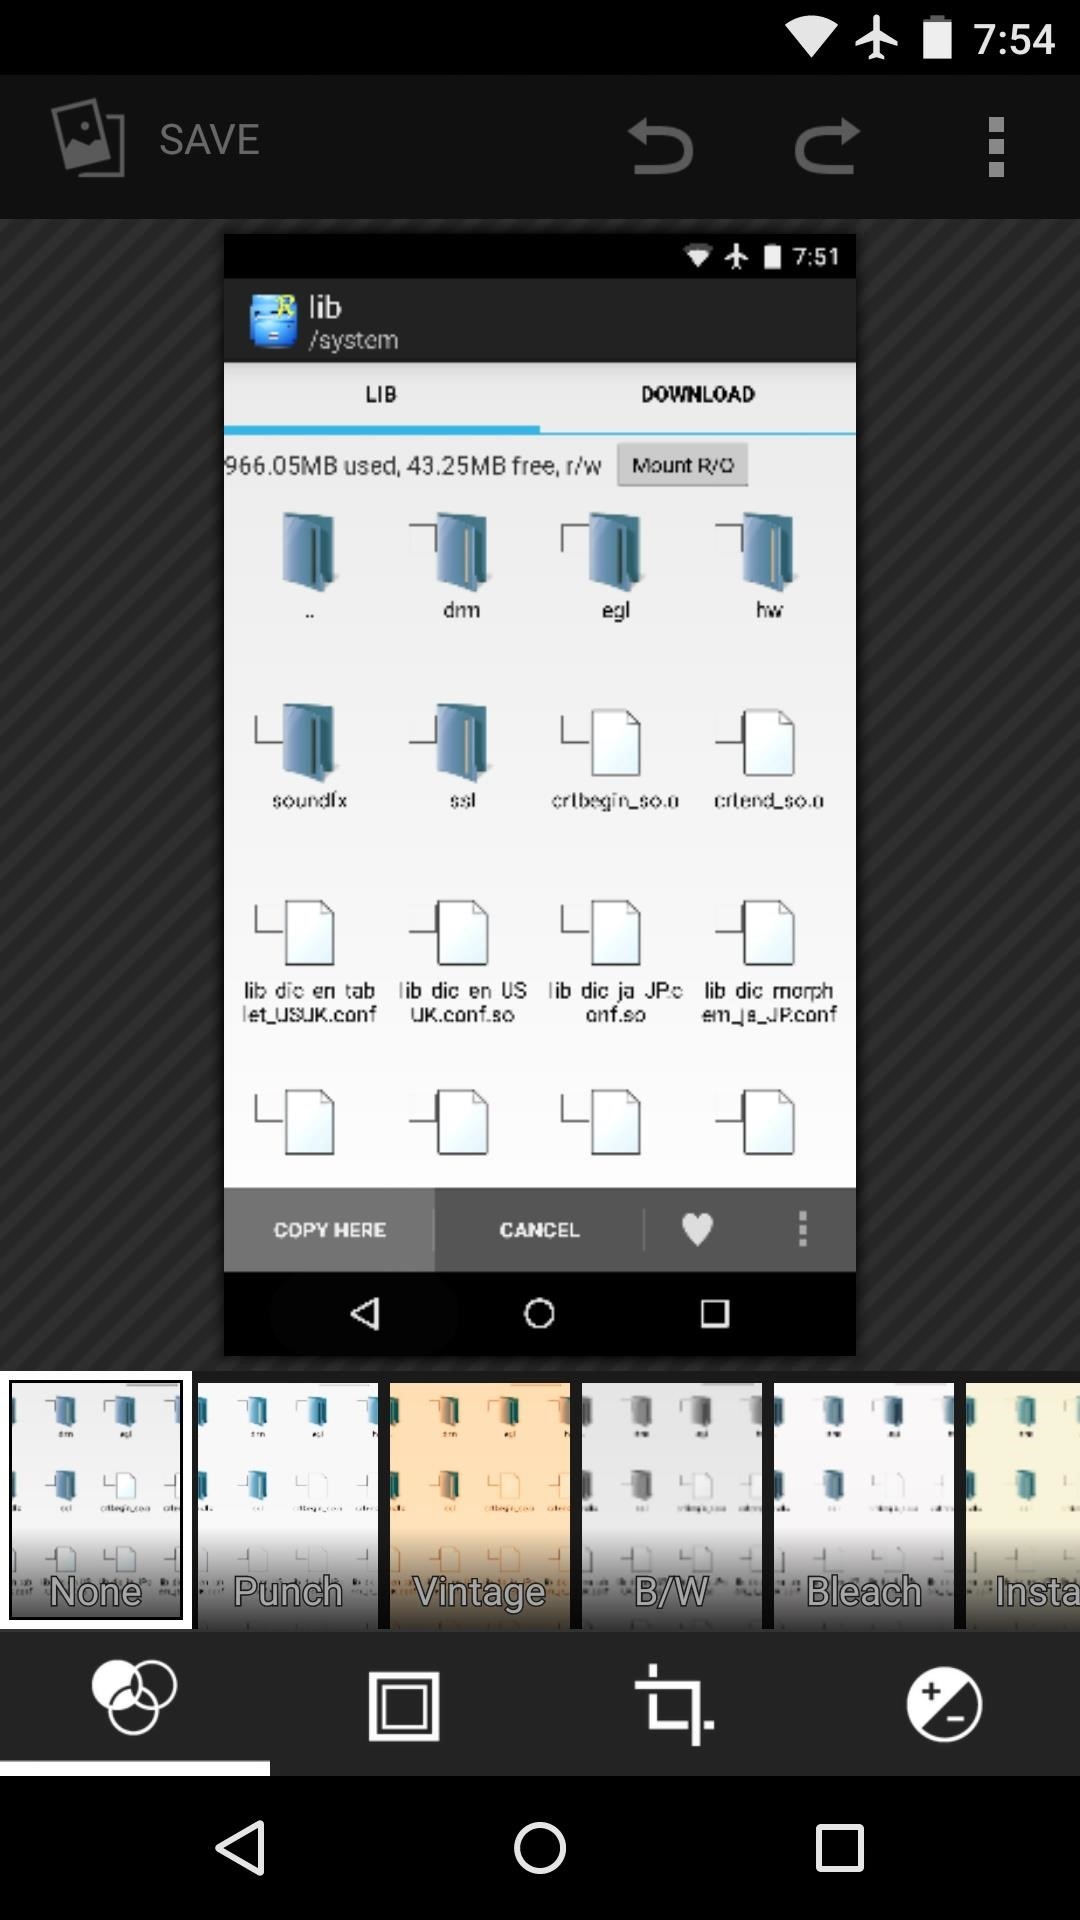 Get Back the Gallery App on Any Nexus Device Running Lollipop